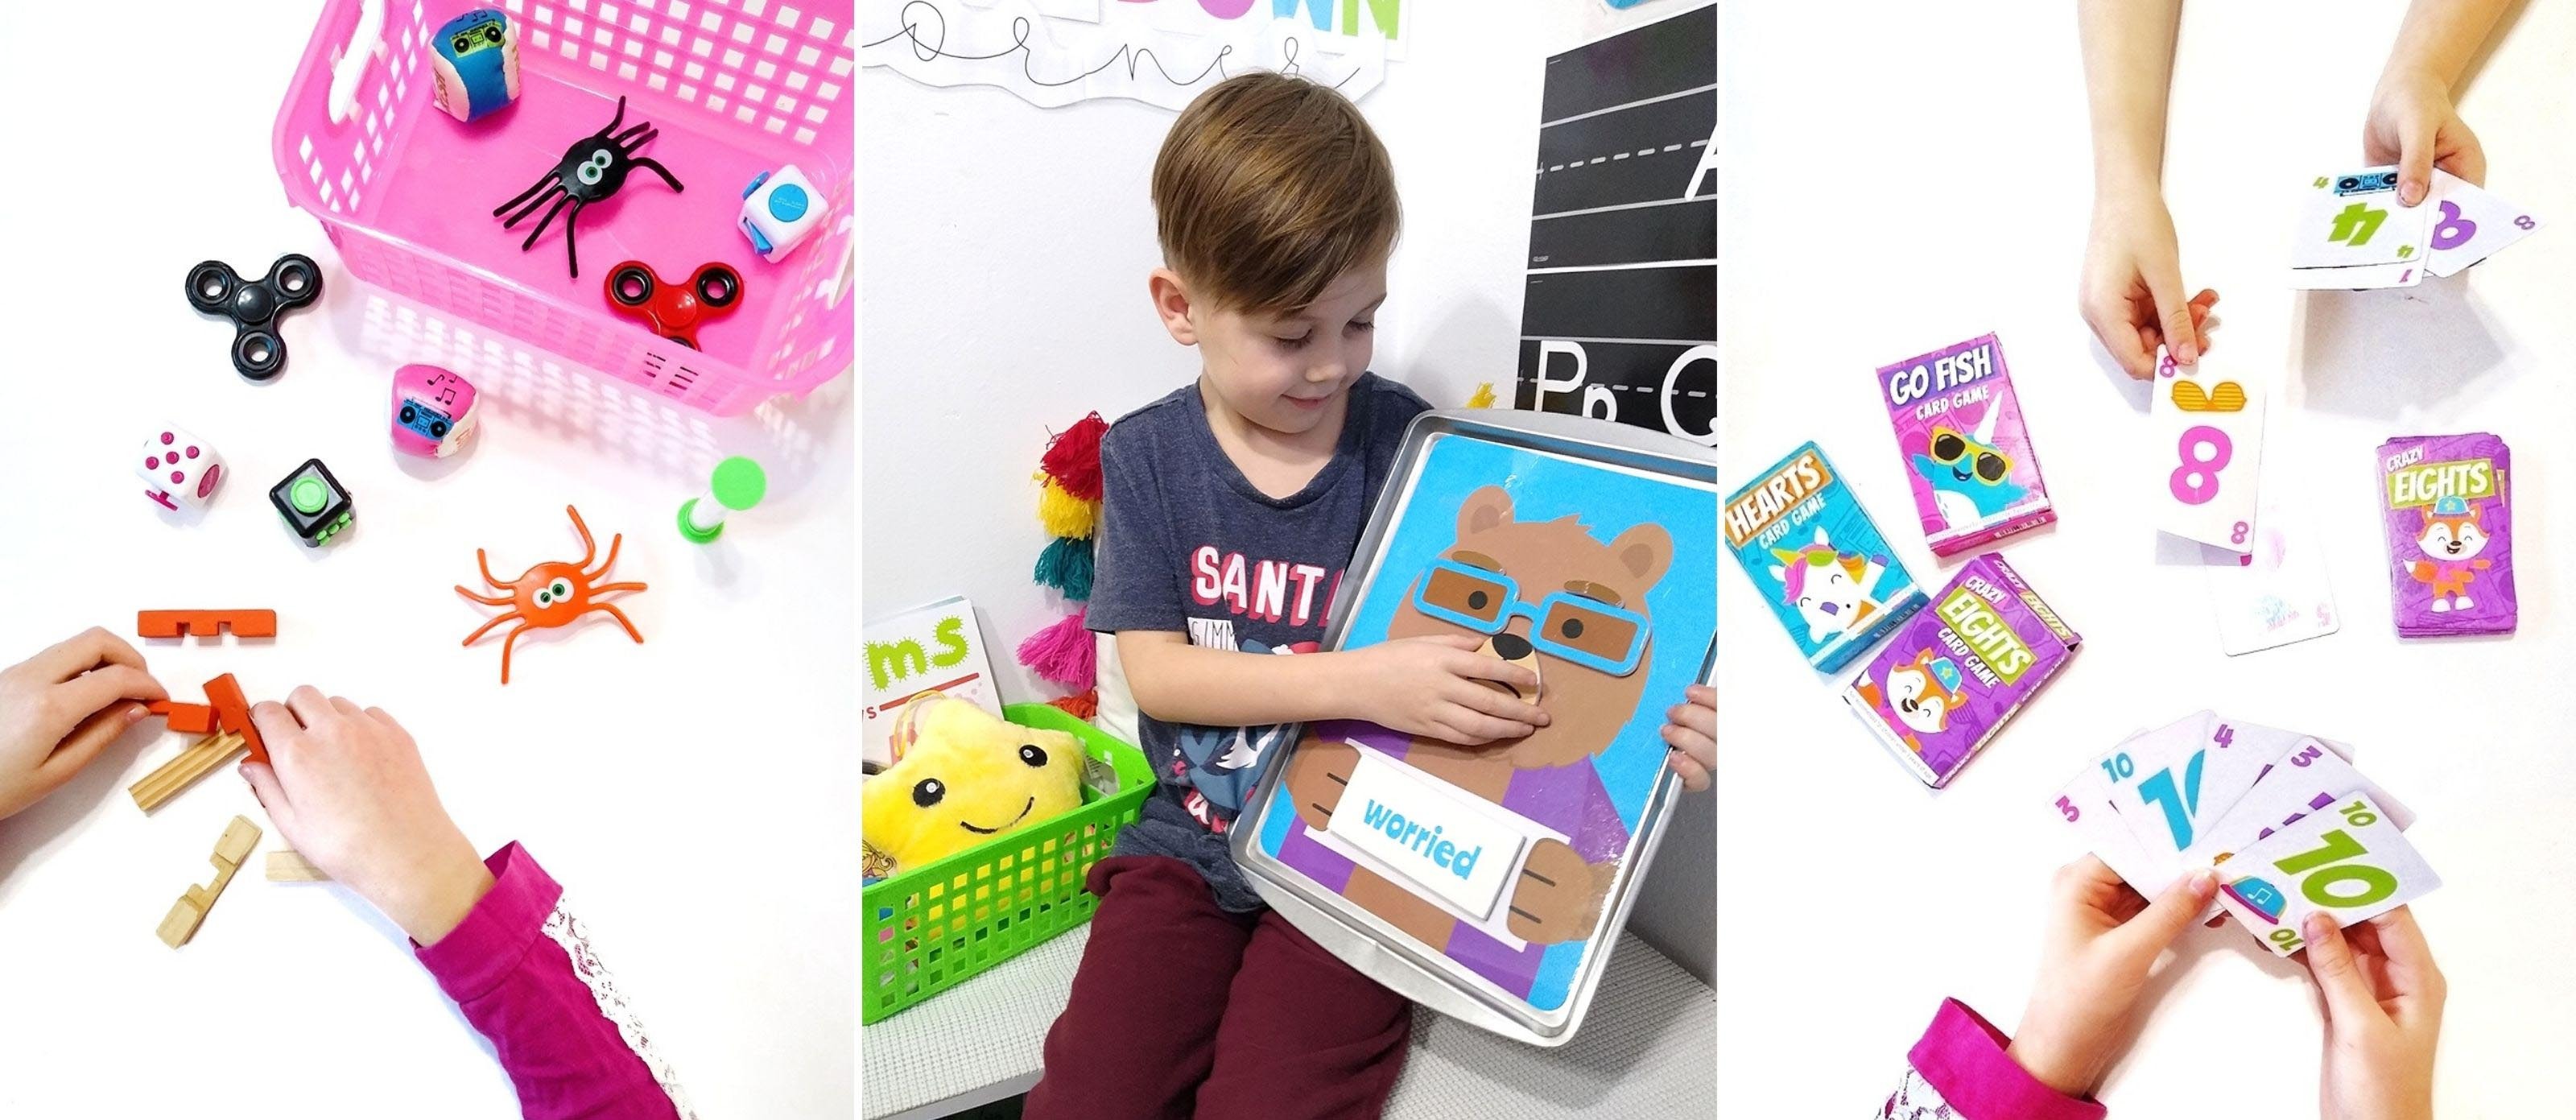 The BUSTER ActivityMat Is A Problem Solving Interactive Play